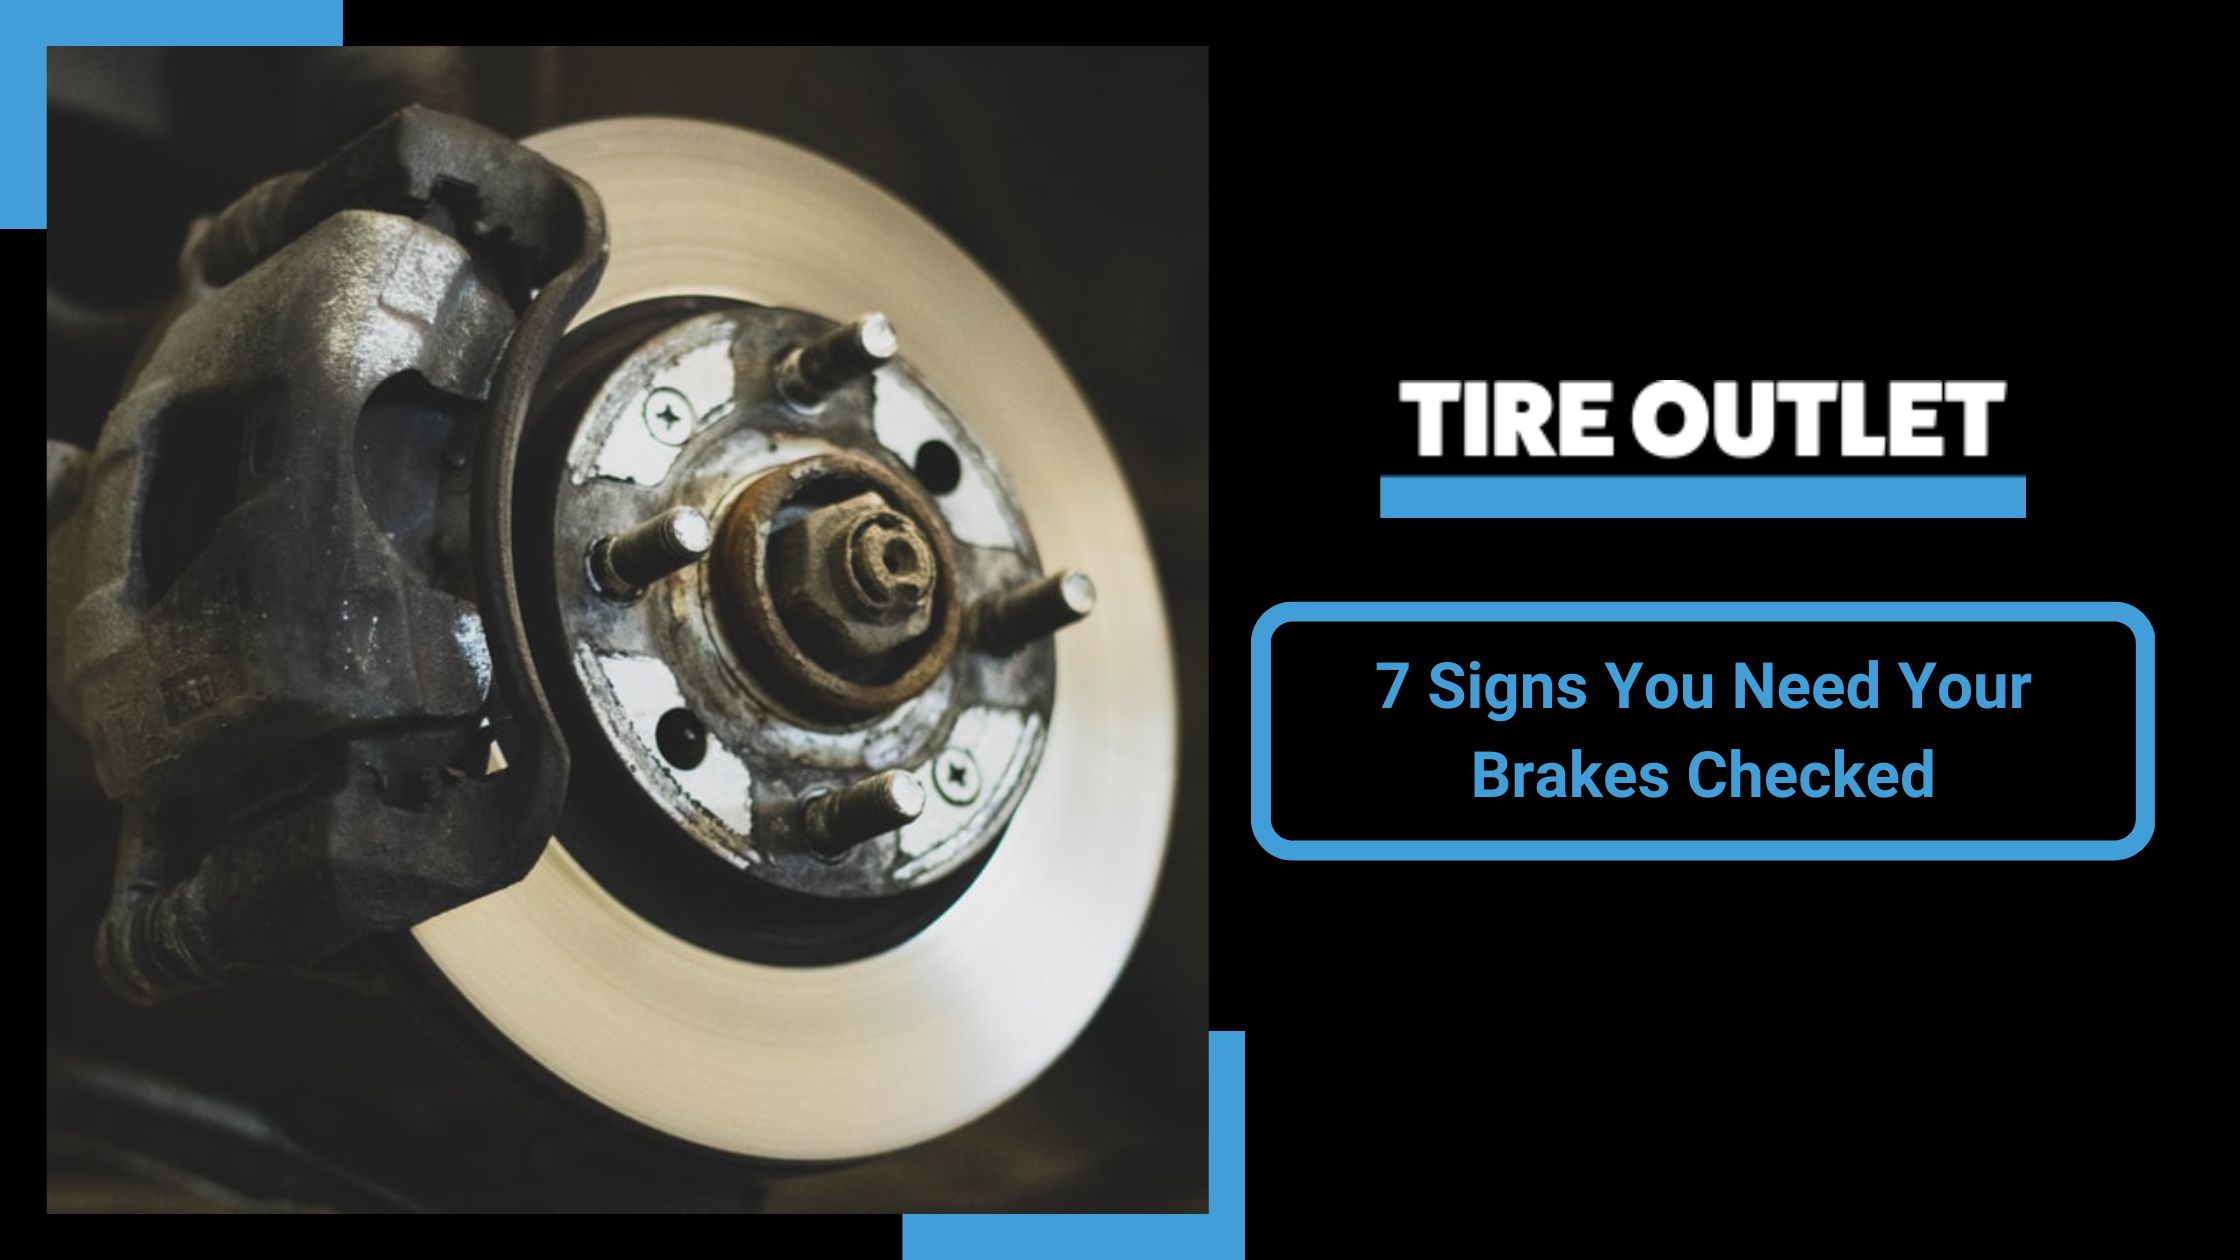 7 Signs You Need Your Brakes Checked